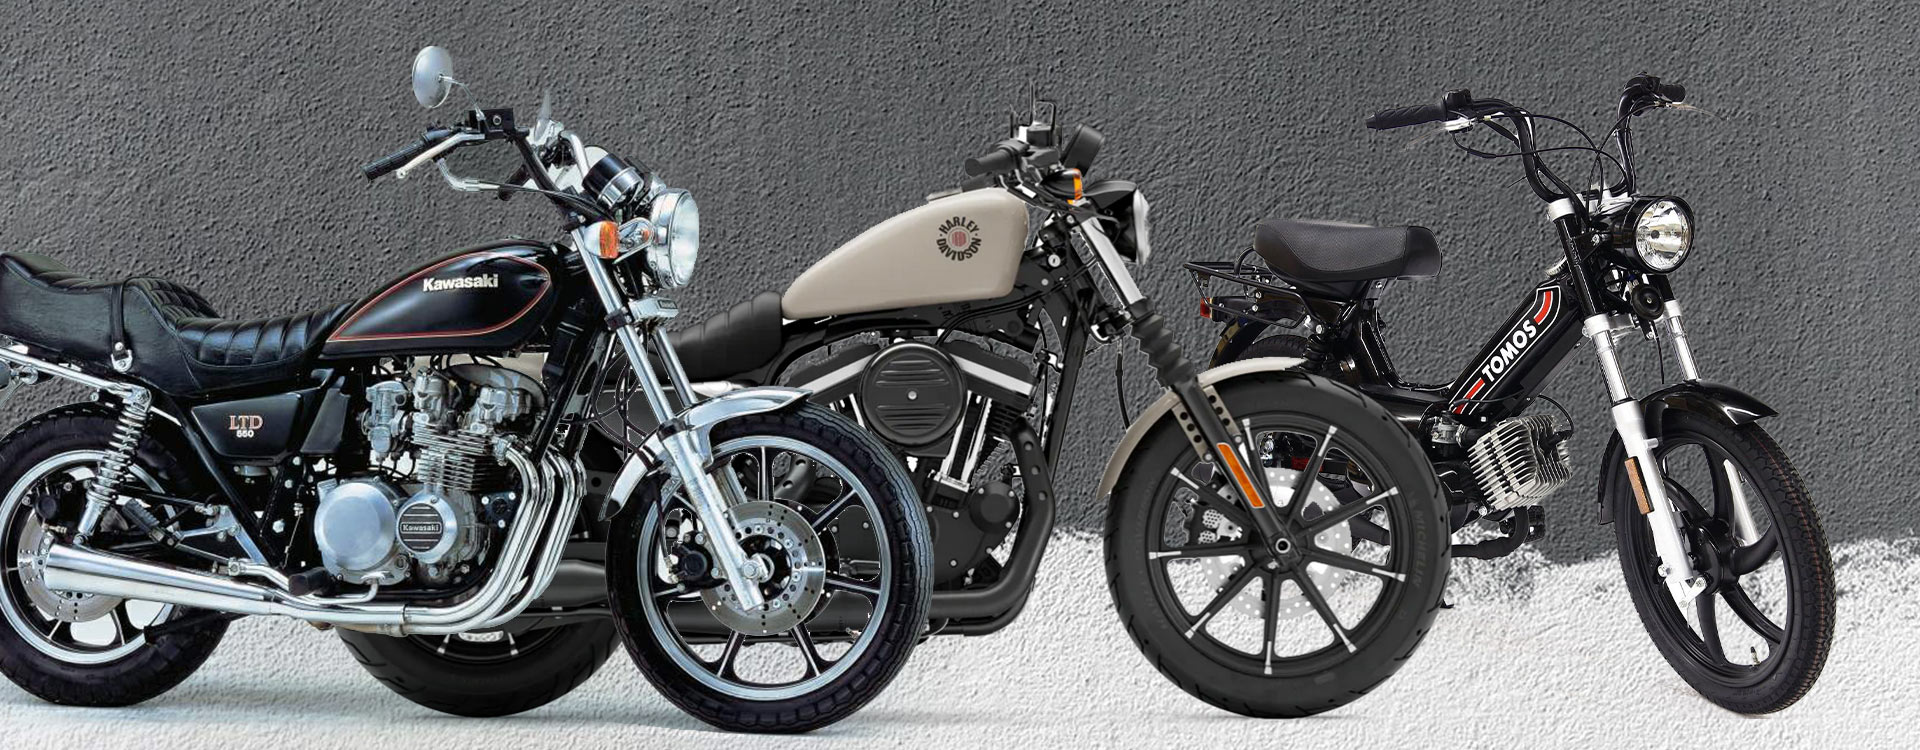 The Best Motorcycles for Modifying 2022